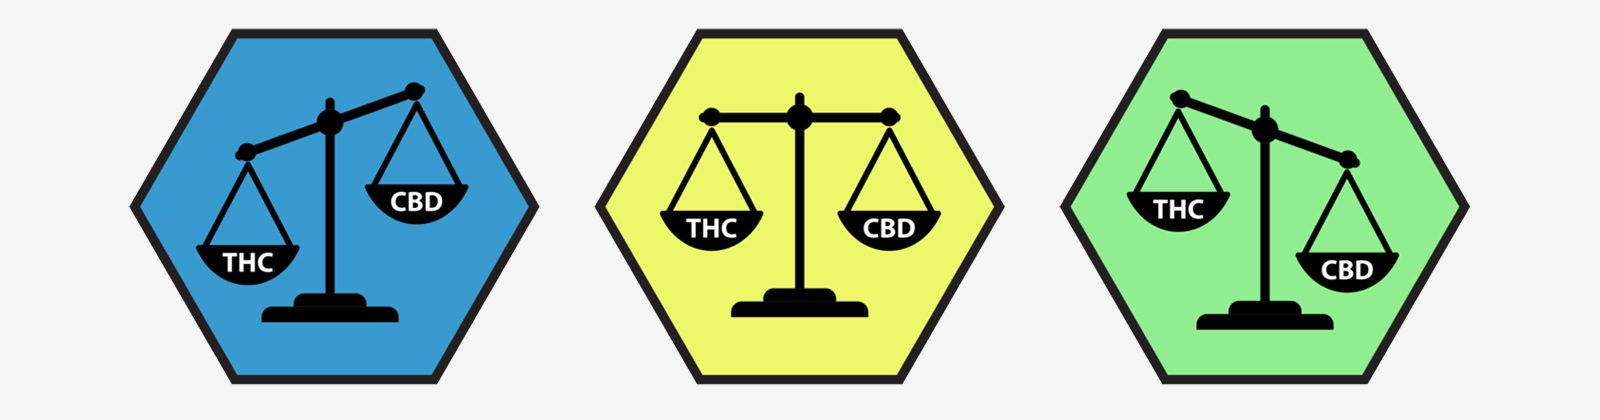 THC to CBD ratio icons, using a balance tipping to left, right or evenly balanced.